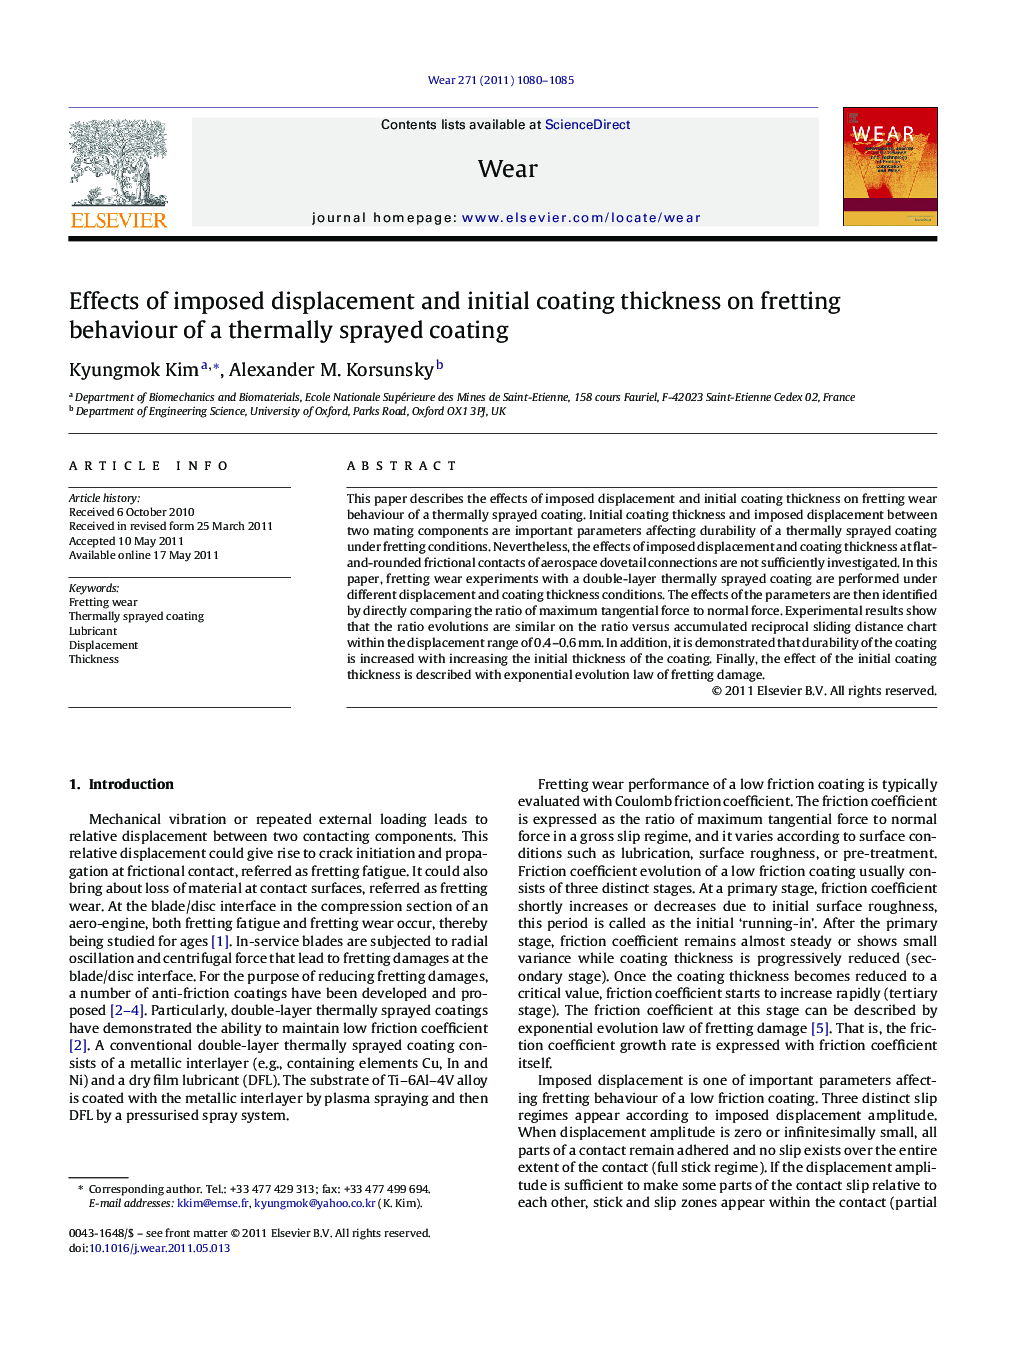 Effects of imposed displacement and initial coating thickness on fretting behaviour of a thermally sprayed coating